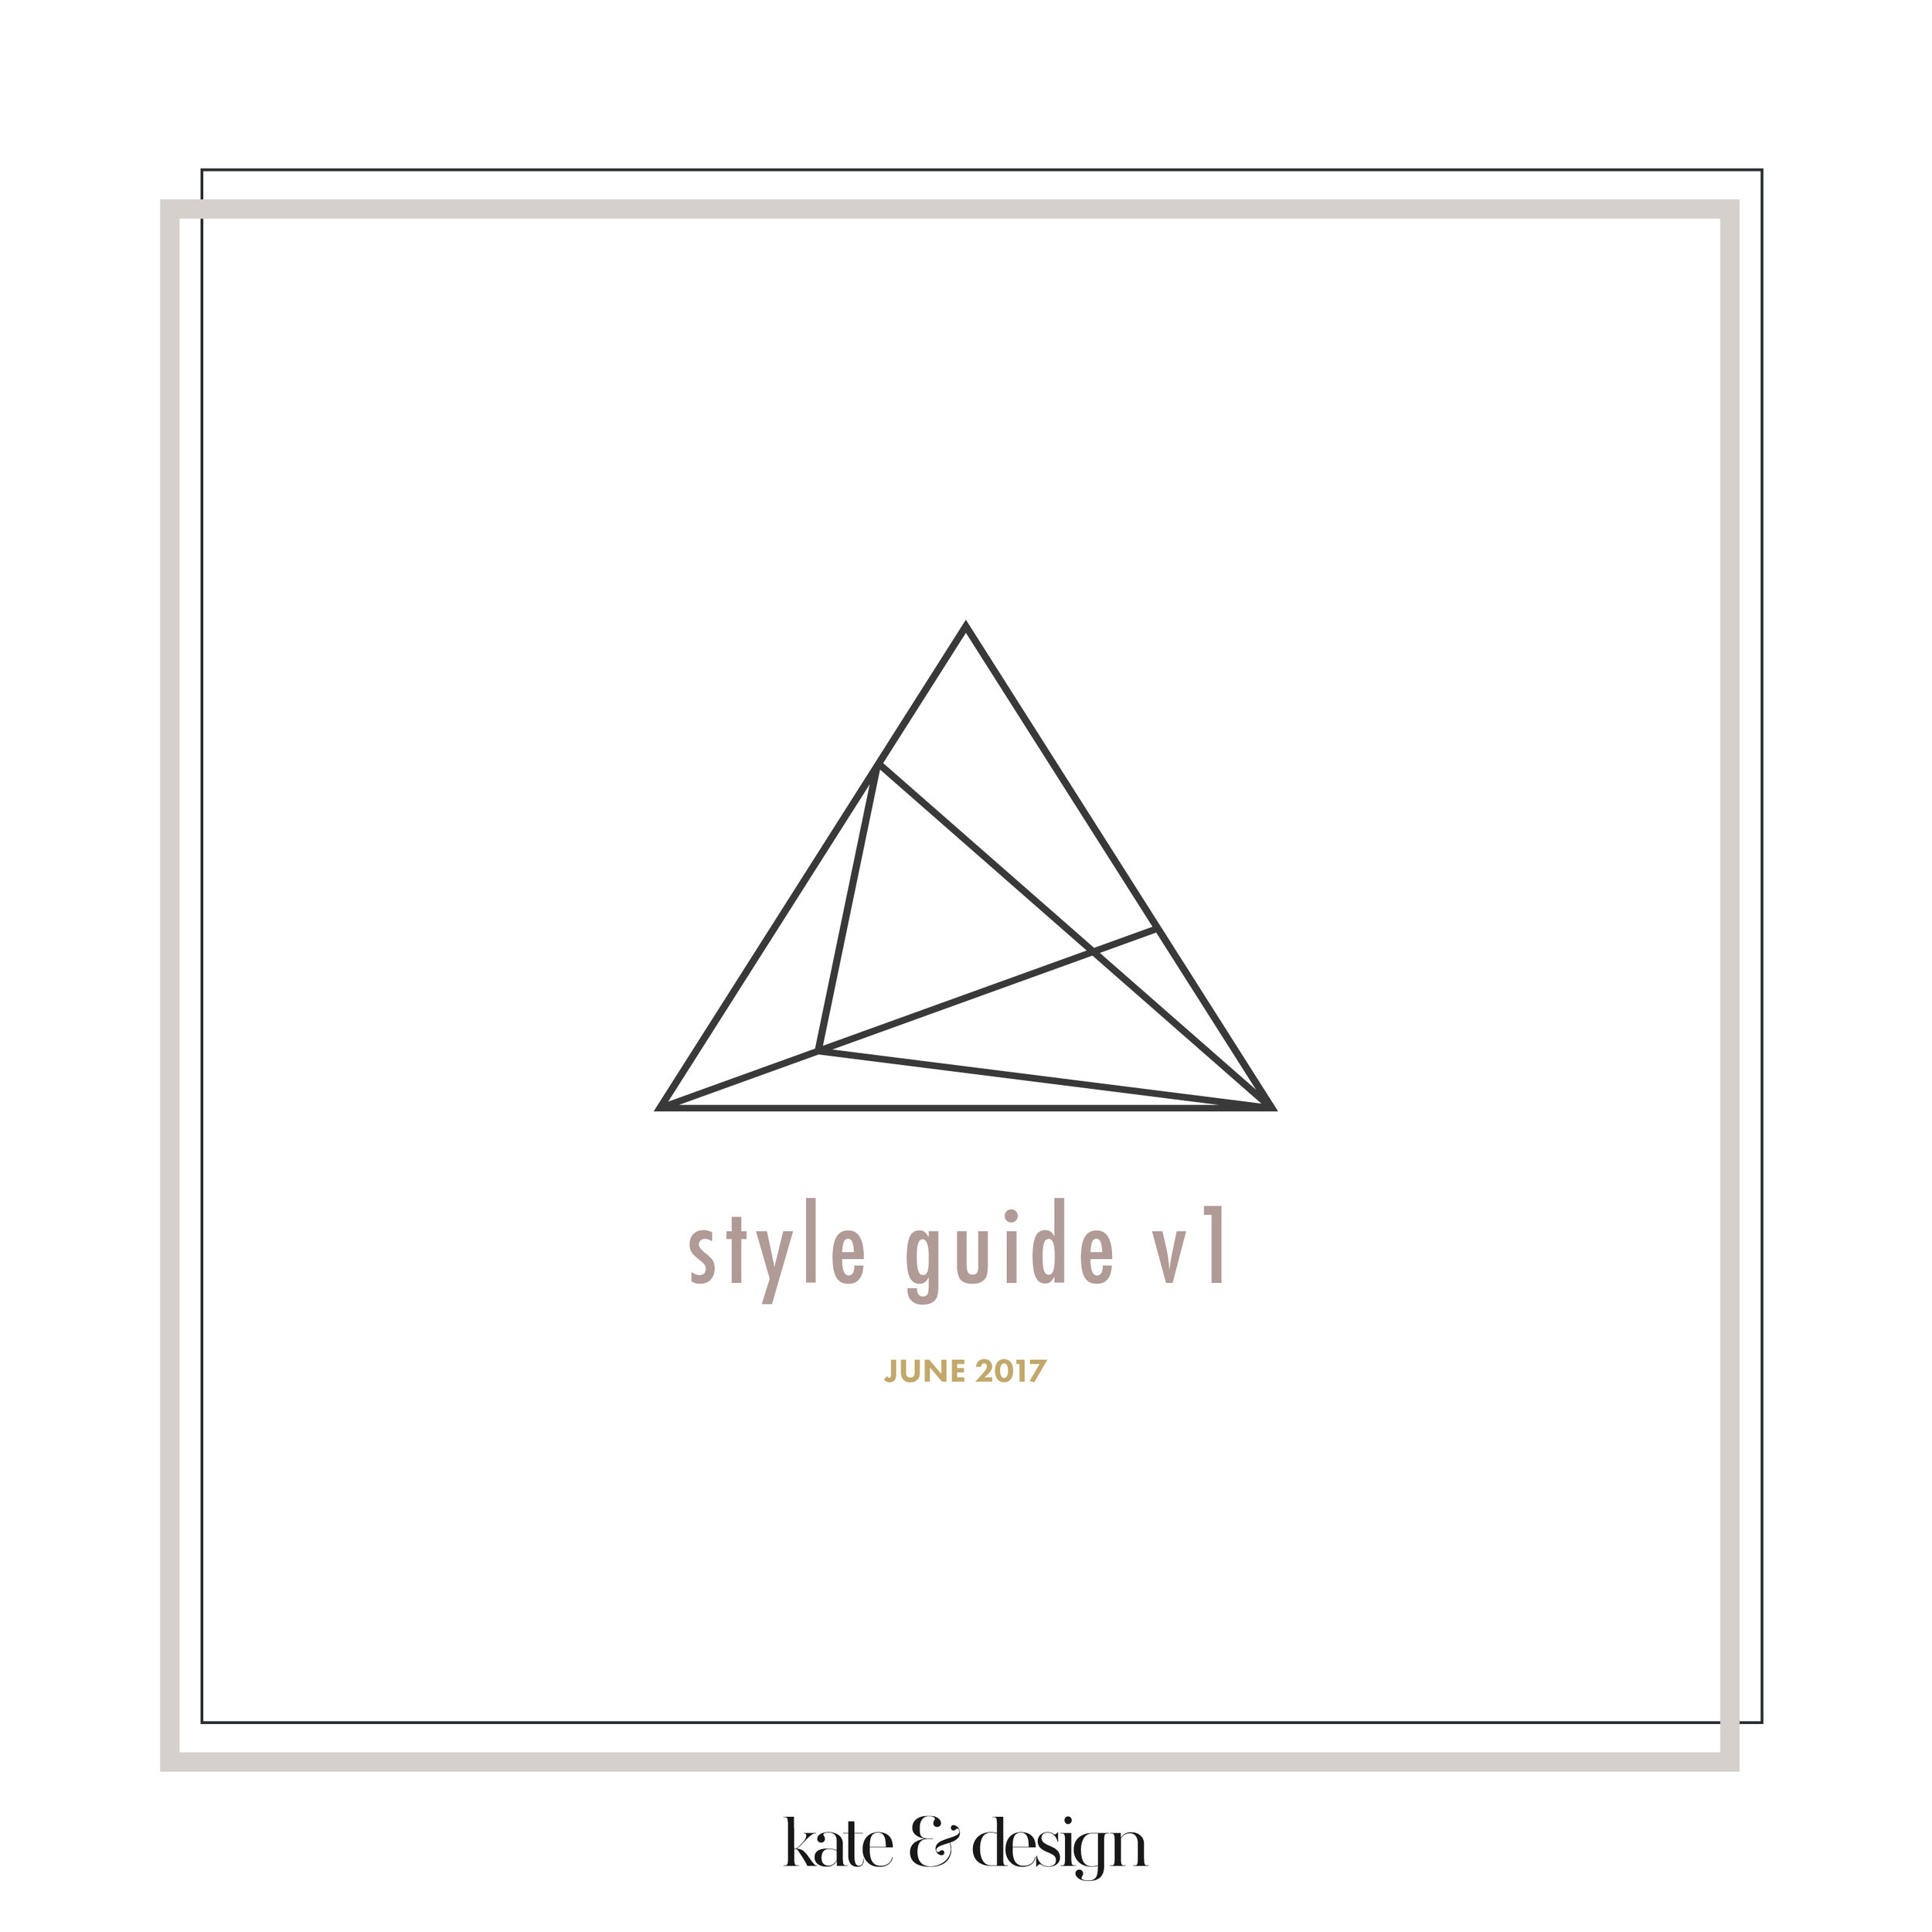 Copy of Copy of style guide v1